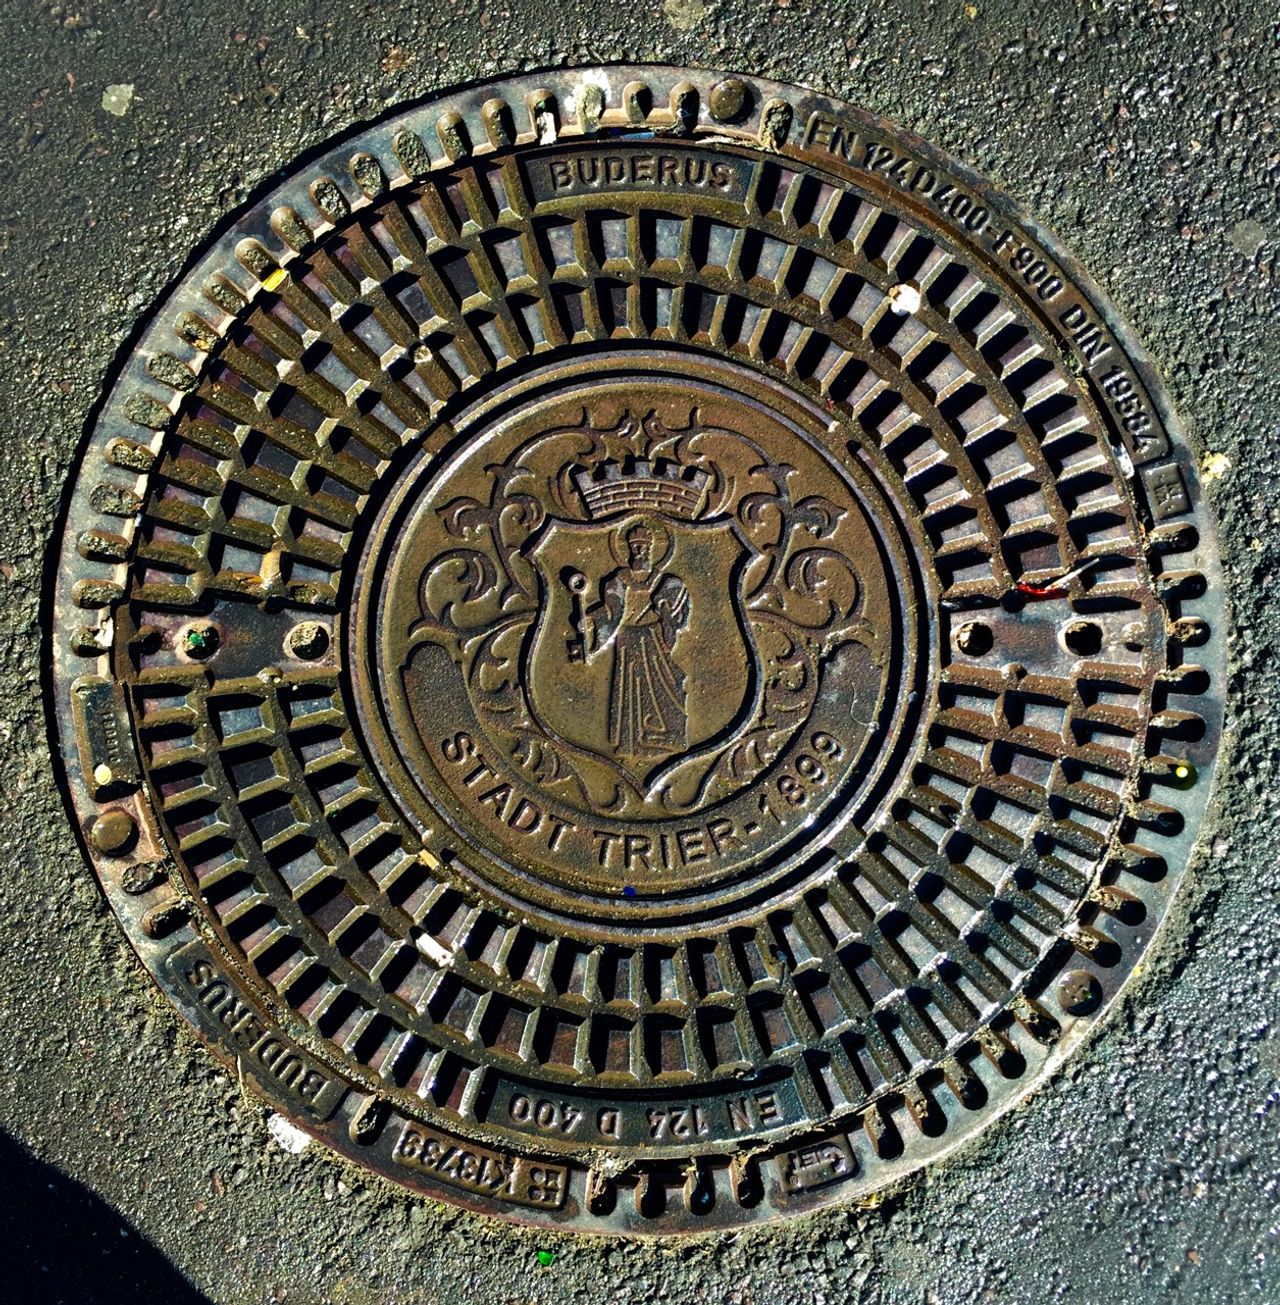 Manhole cover in Trier city center which reads 'Stadt Trier 1899'